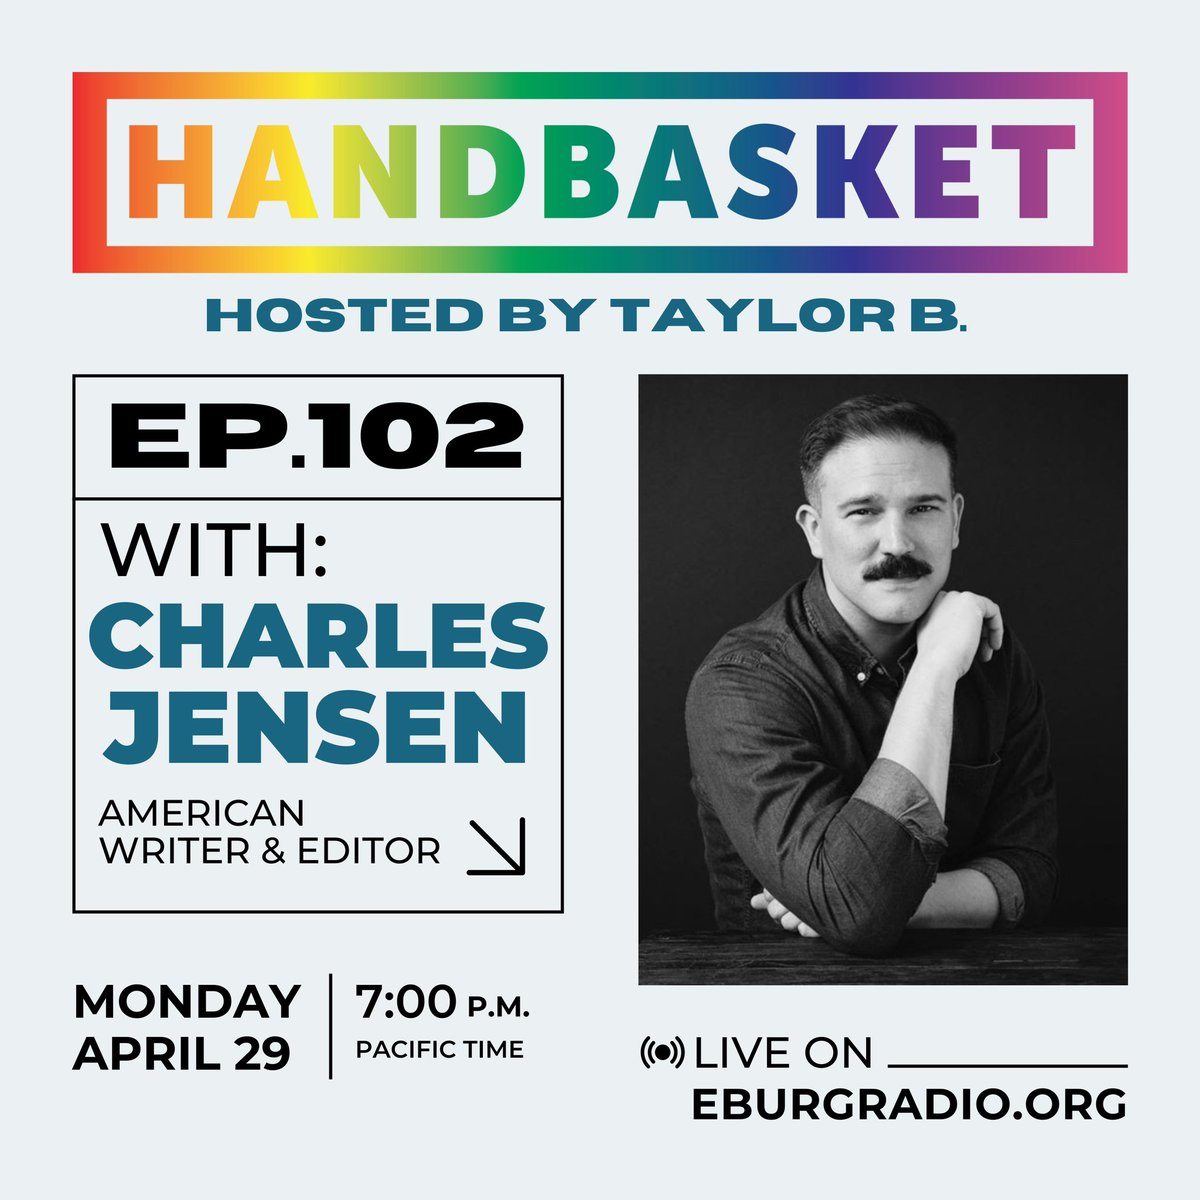 Don’t miss ep. #102 of Handbasket with special guest @charles_jensen! The award-winning writer is releasing his new book, Splice of Life: A Memoir in 13 Film Genres, in May. He will make his Handbasket premiere with song picks & an interview with Taylor B! eburgradio.org